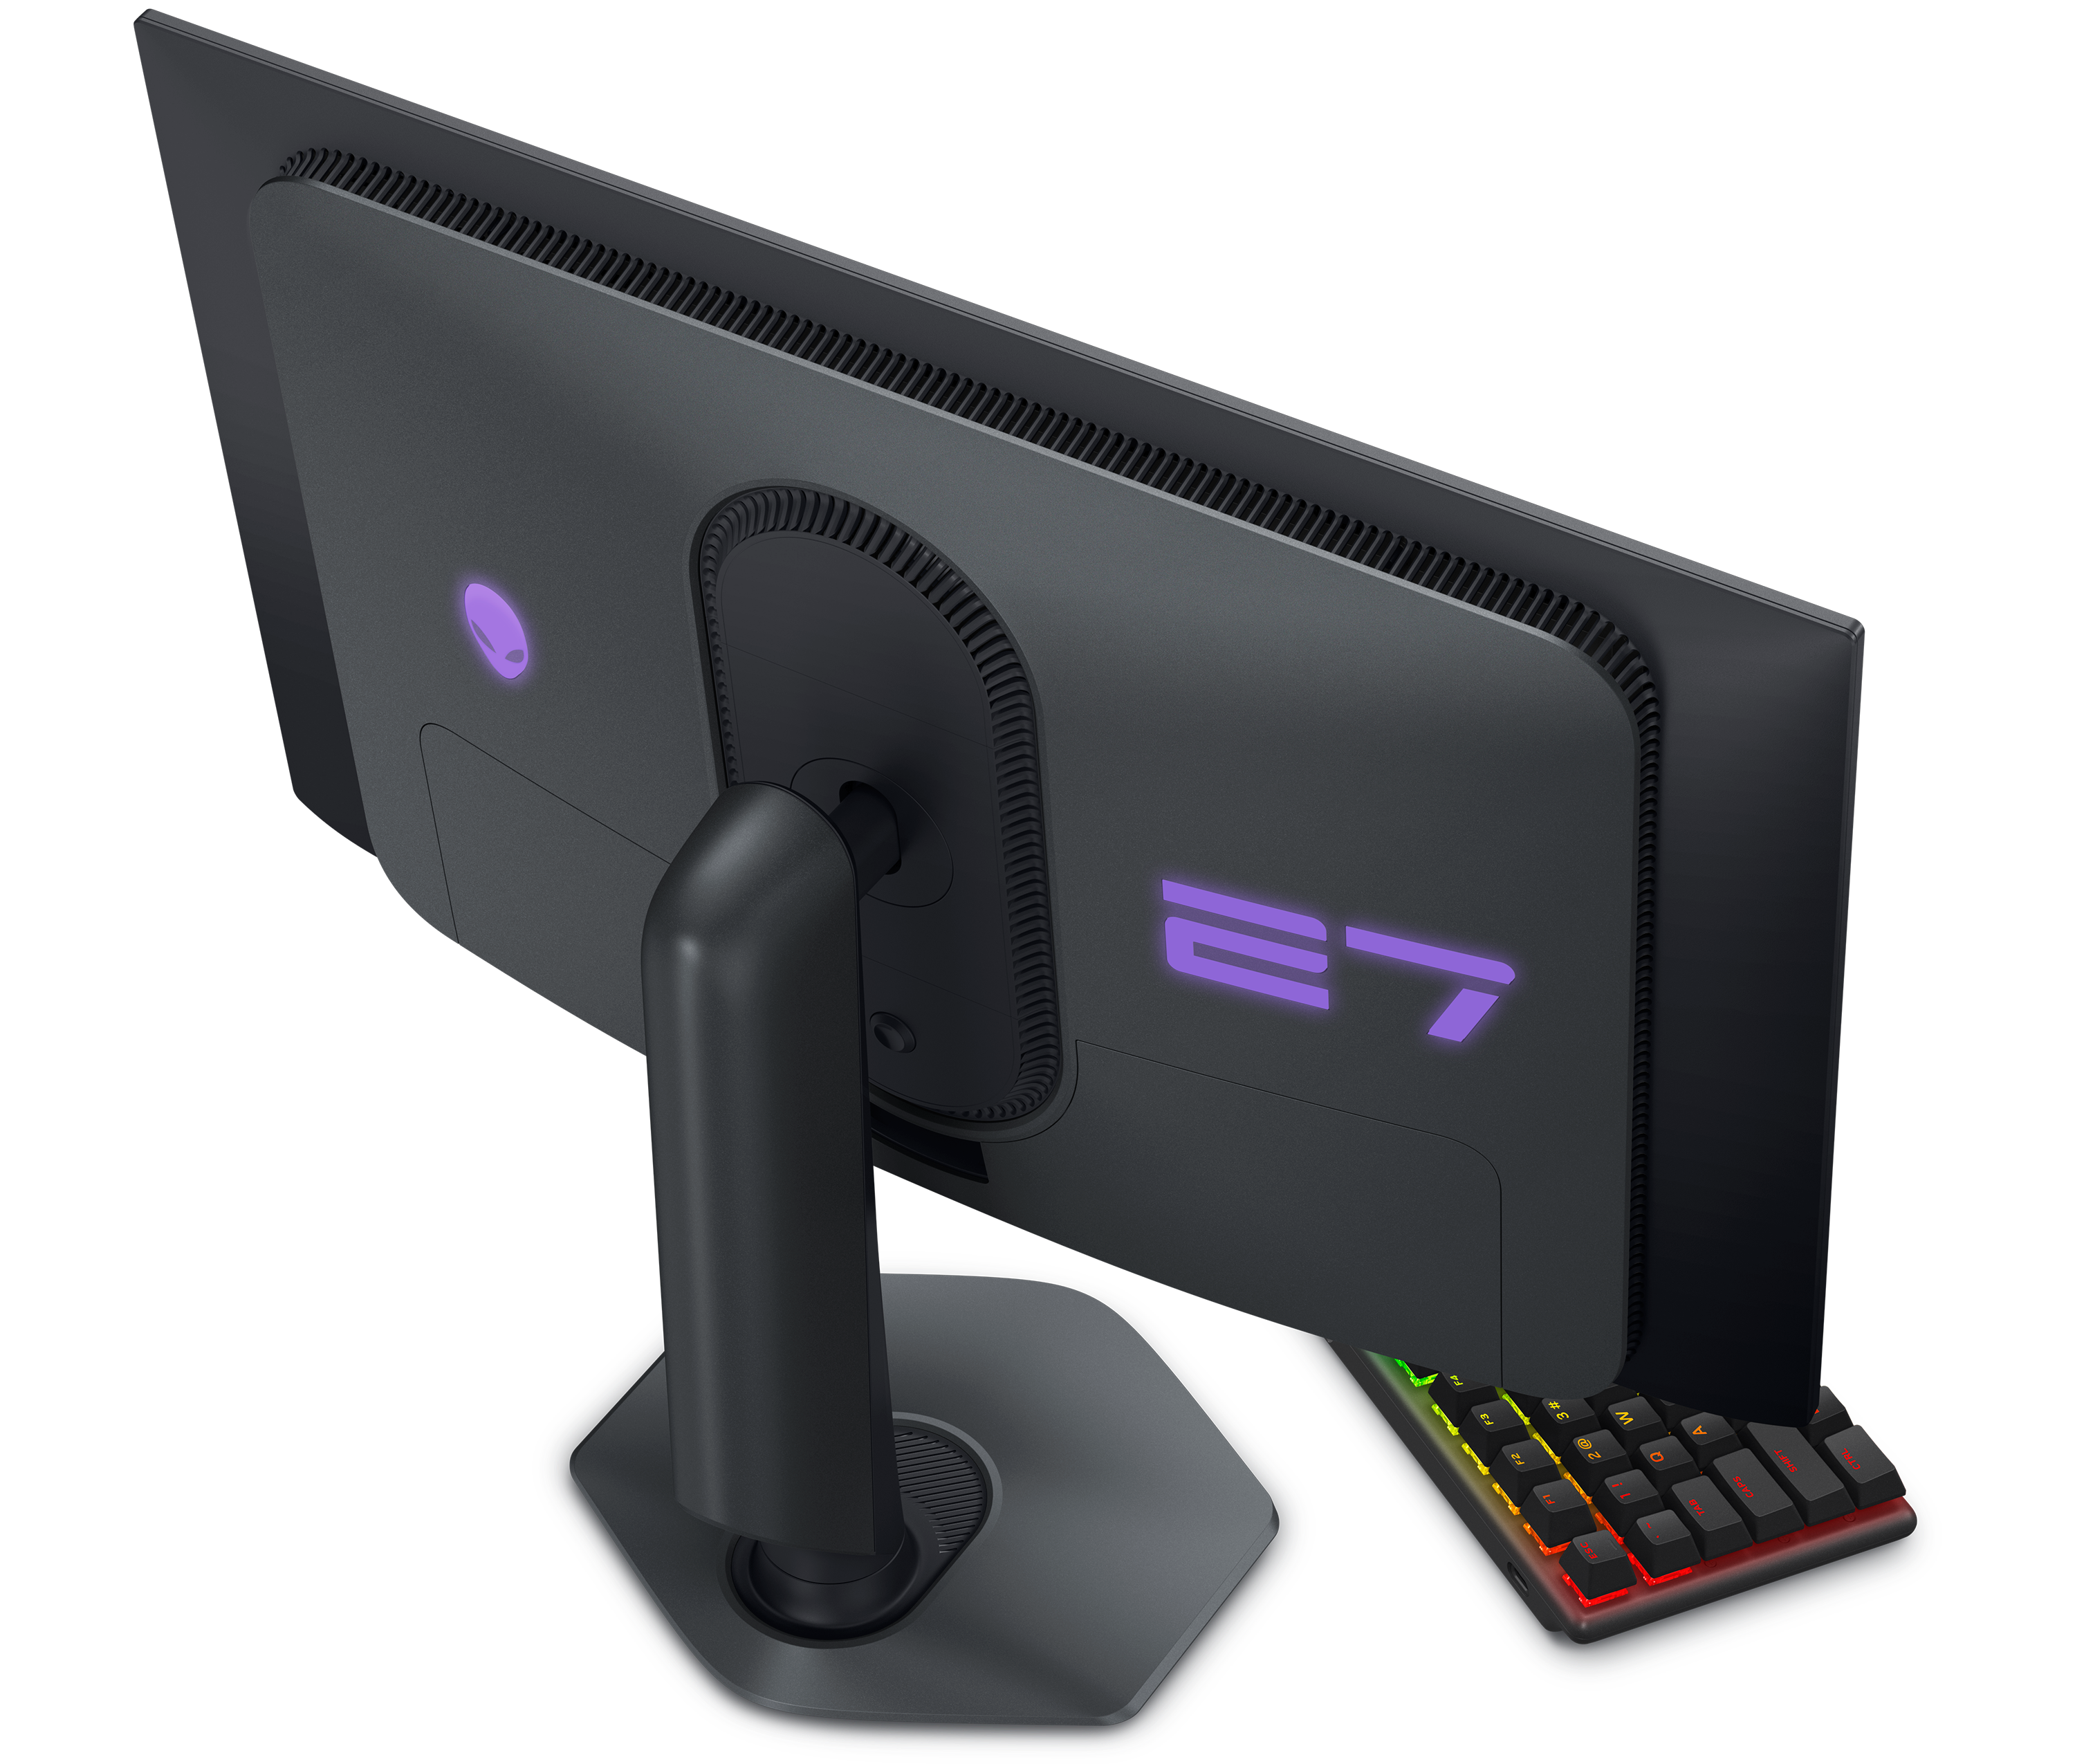 Dell AW2725DF Gaming Monitor and Alienware keyboard.